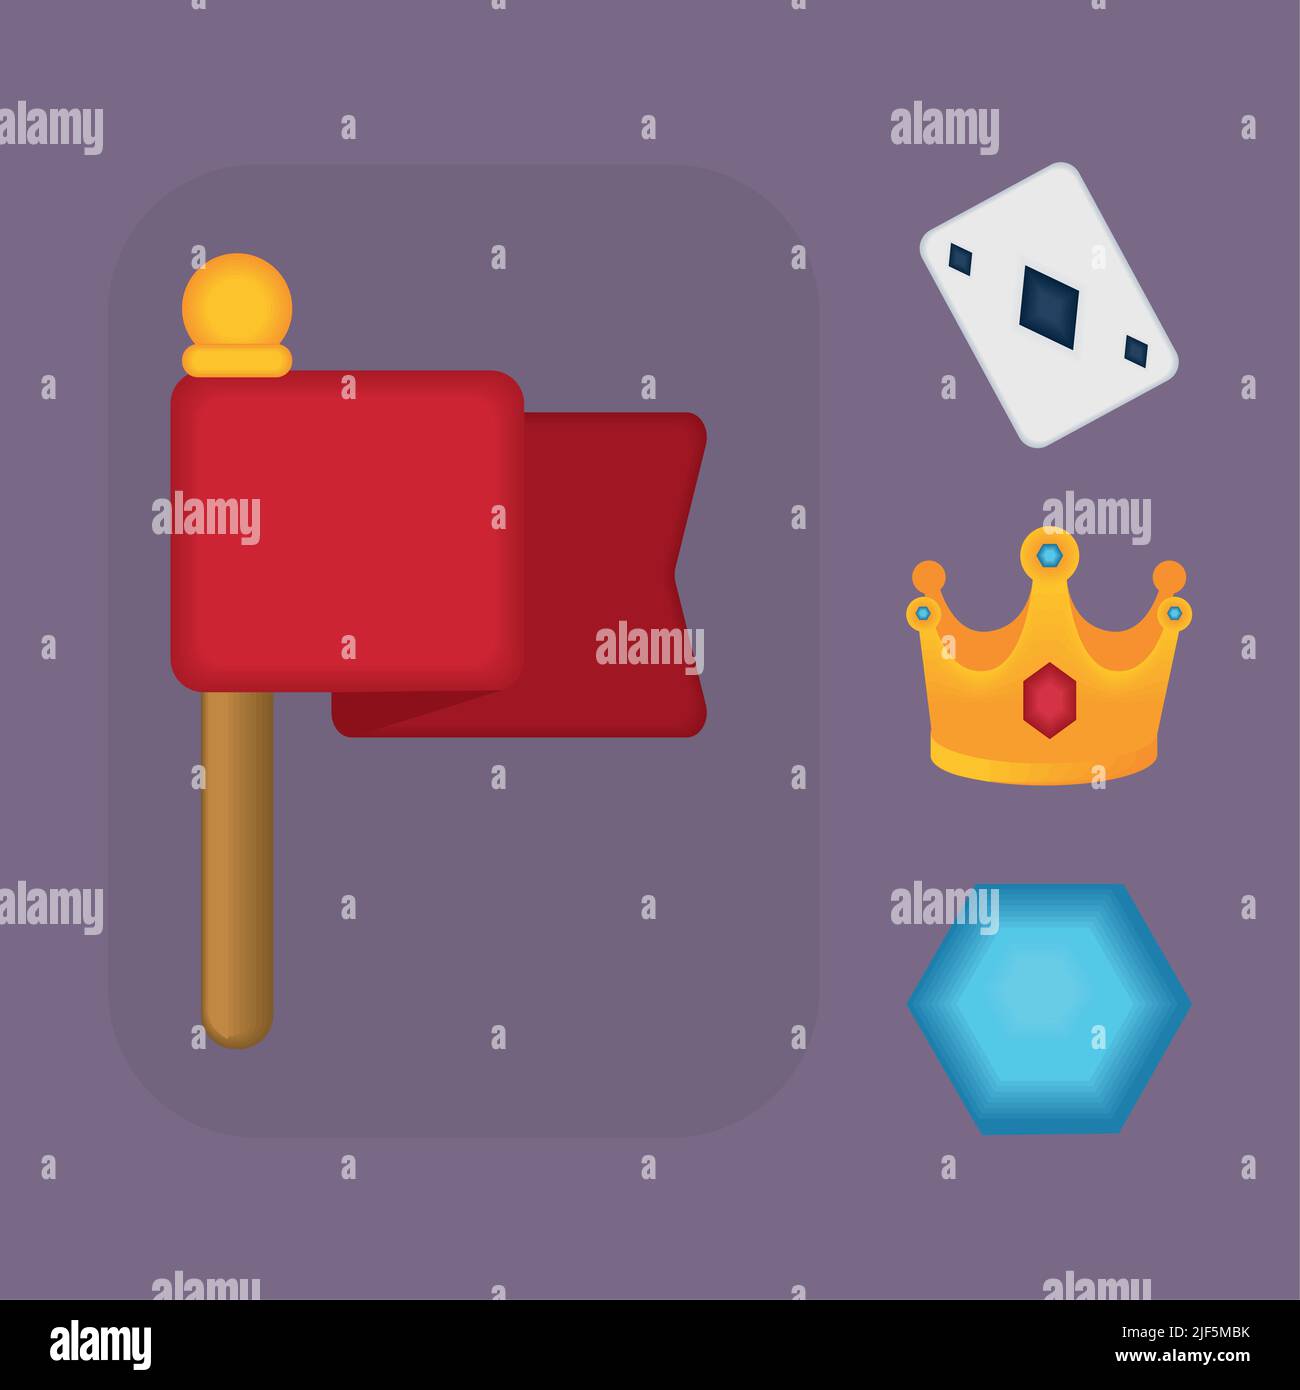 game icons set Stock Vector